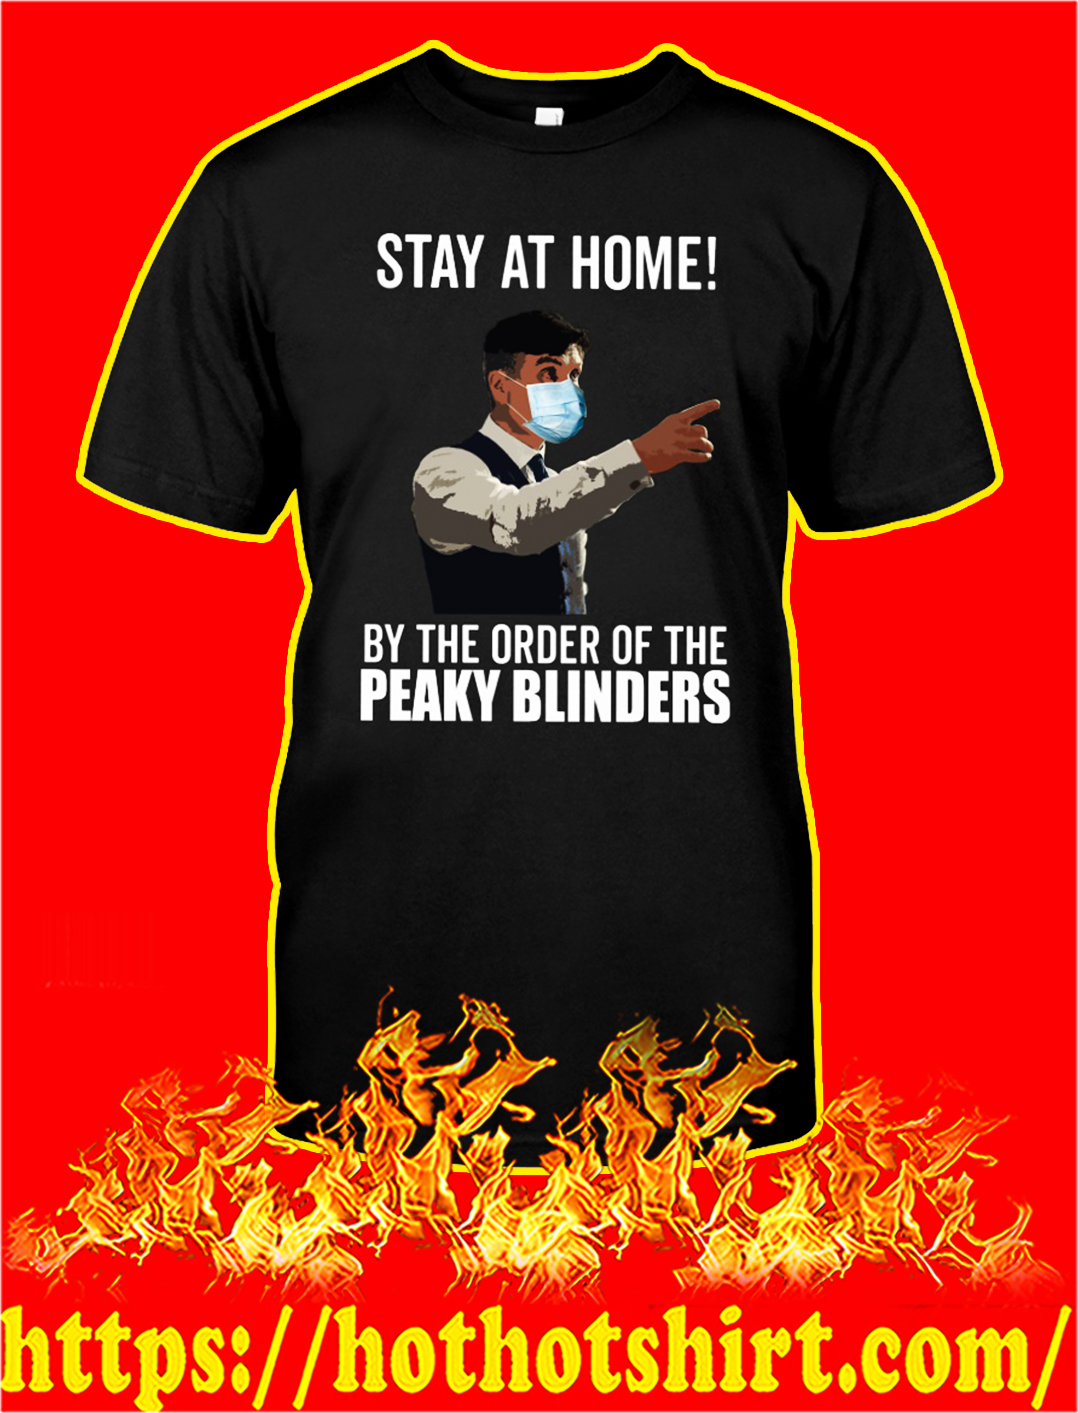 Stay at home by the order of the Peaky Blinders shirt and sweatshirt